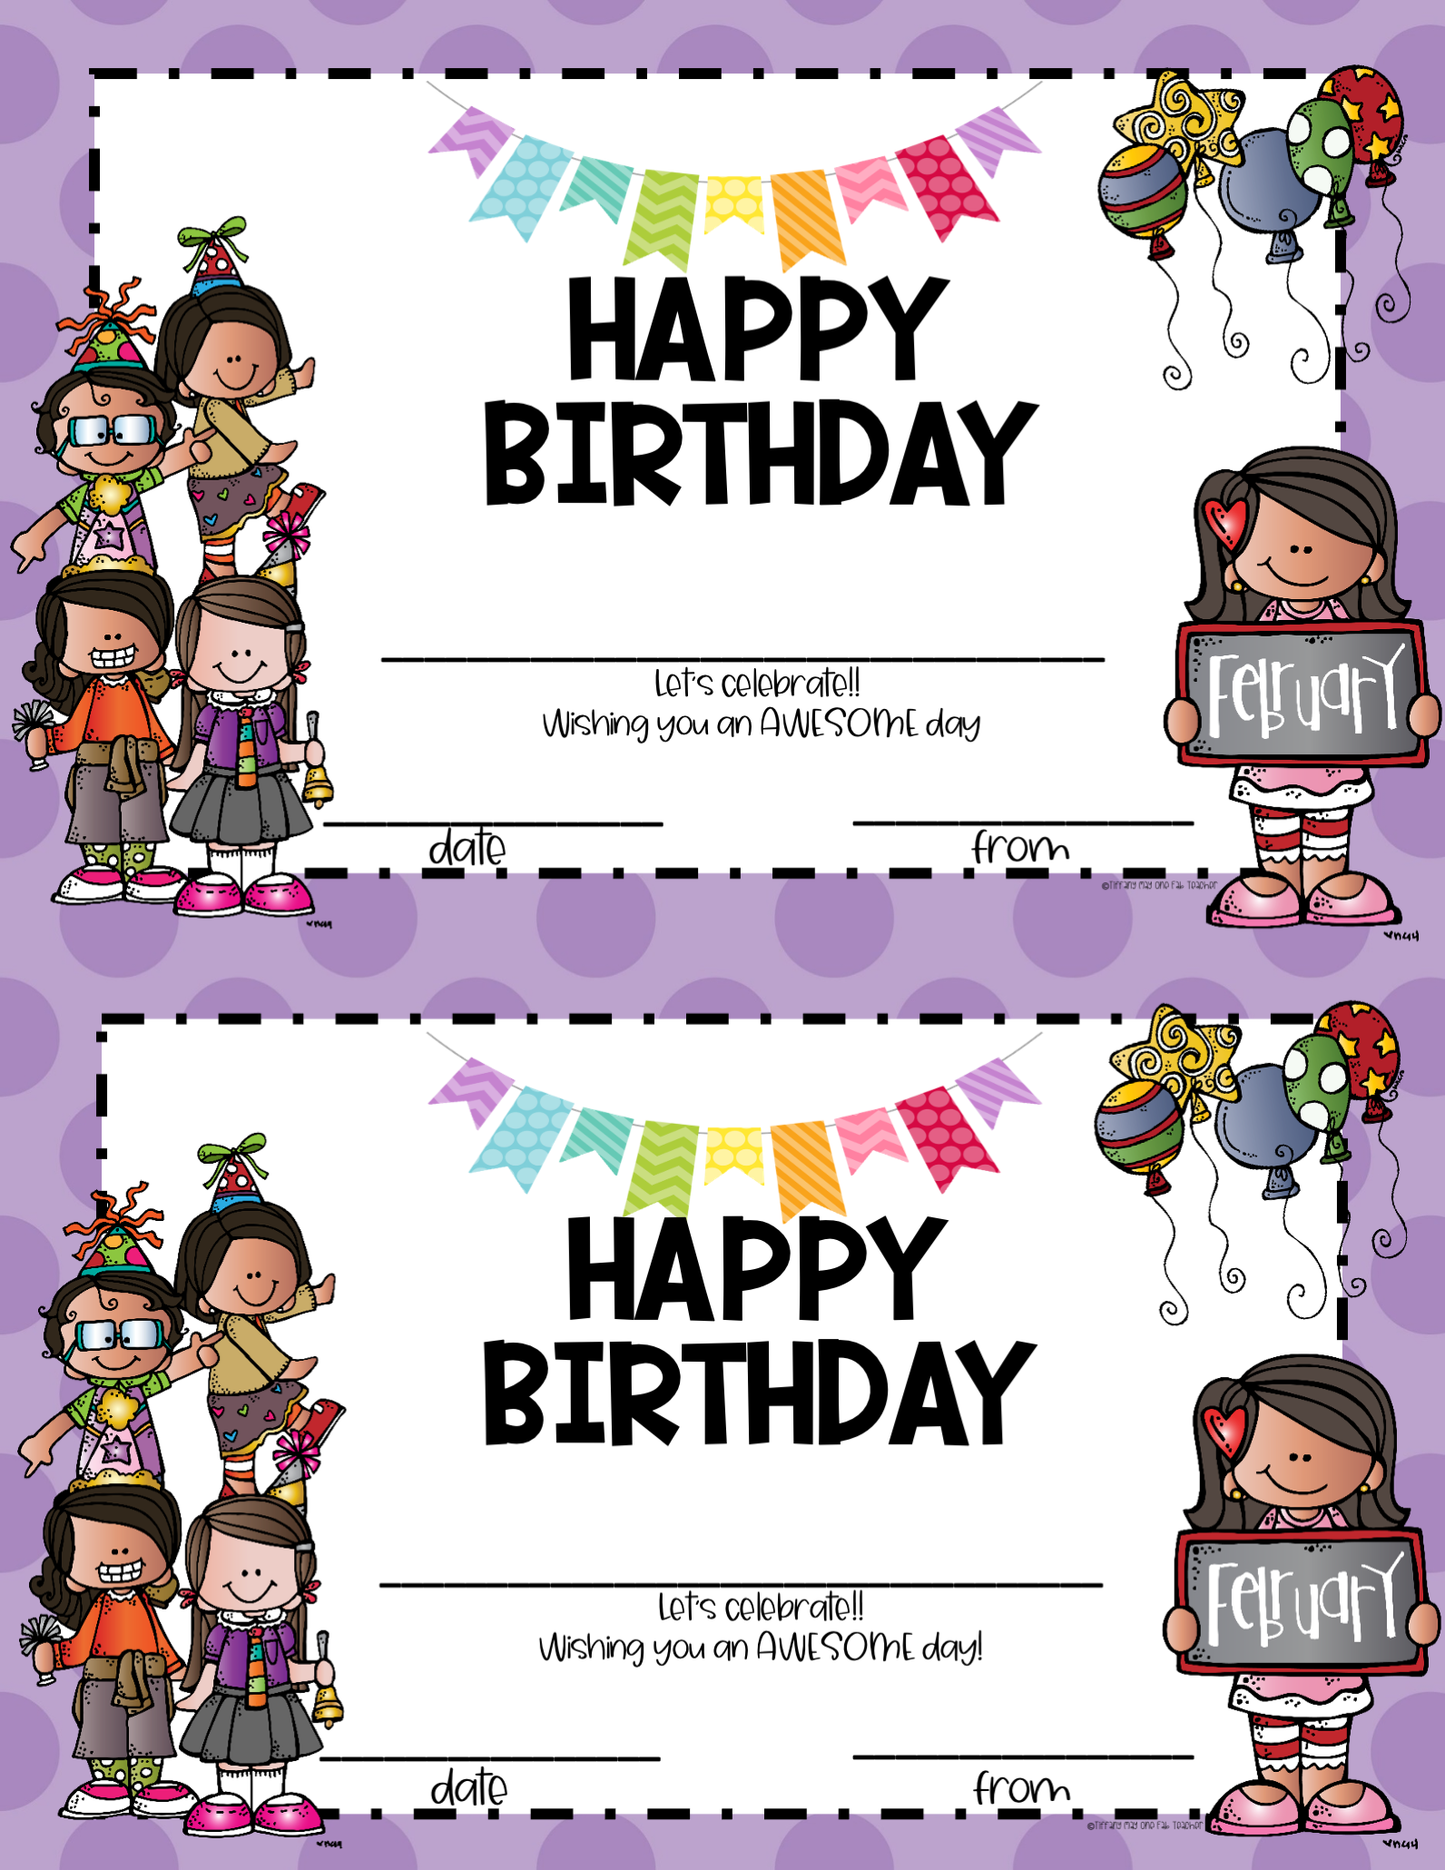 Happy Birthday Certificates | Celebrate with Style: Editable and Personalized